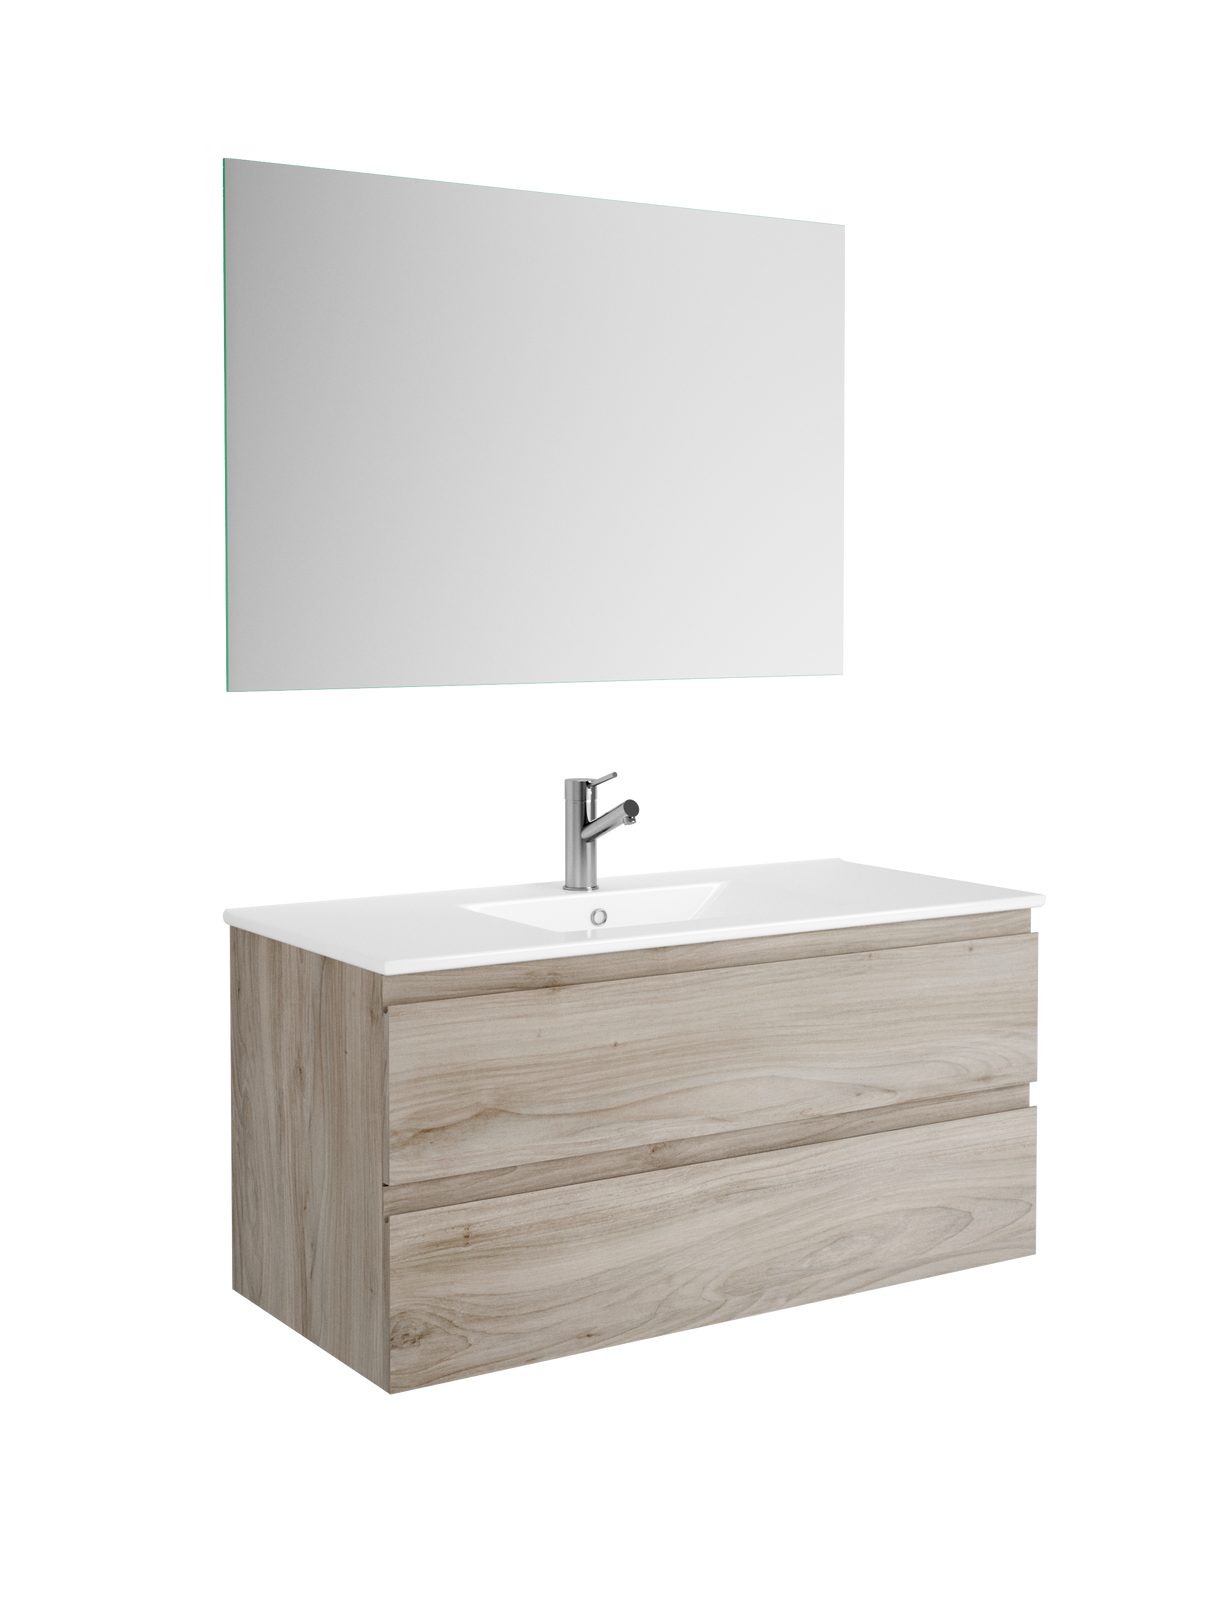 DAX Pasadena Engineered Wood and Porcelain Onix Basin with Vanity Cabinet, 40", Pine DAX-PAS014012-ONX